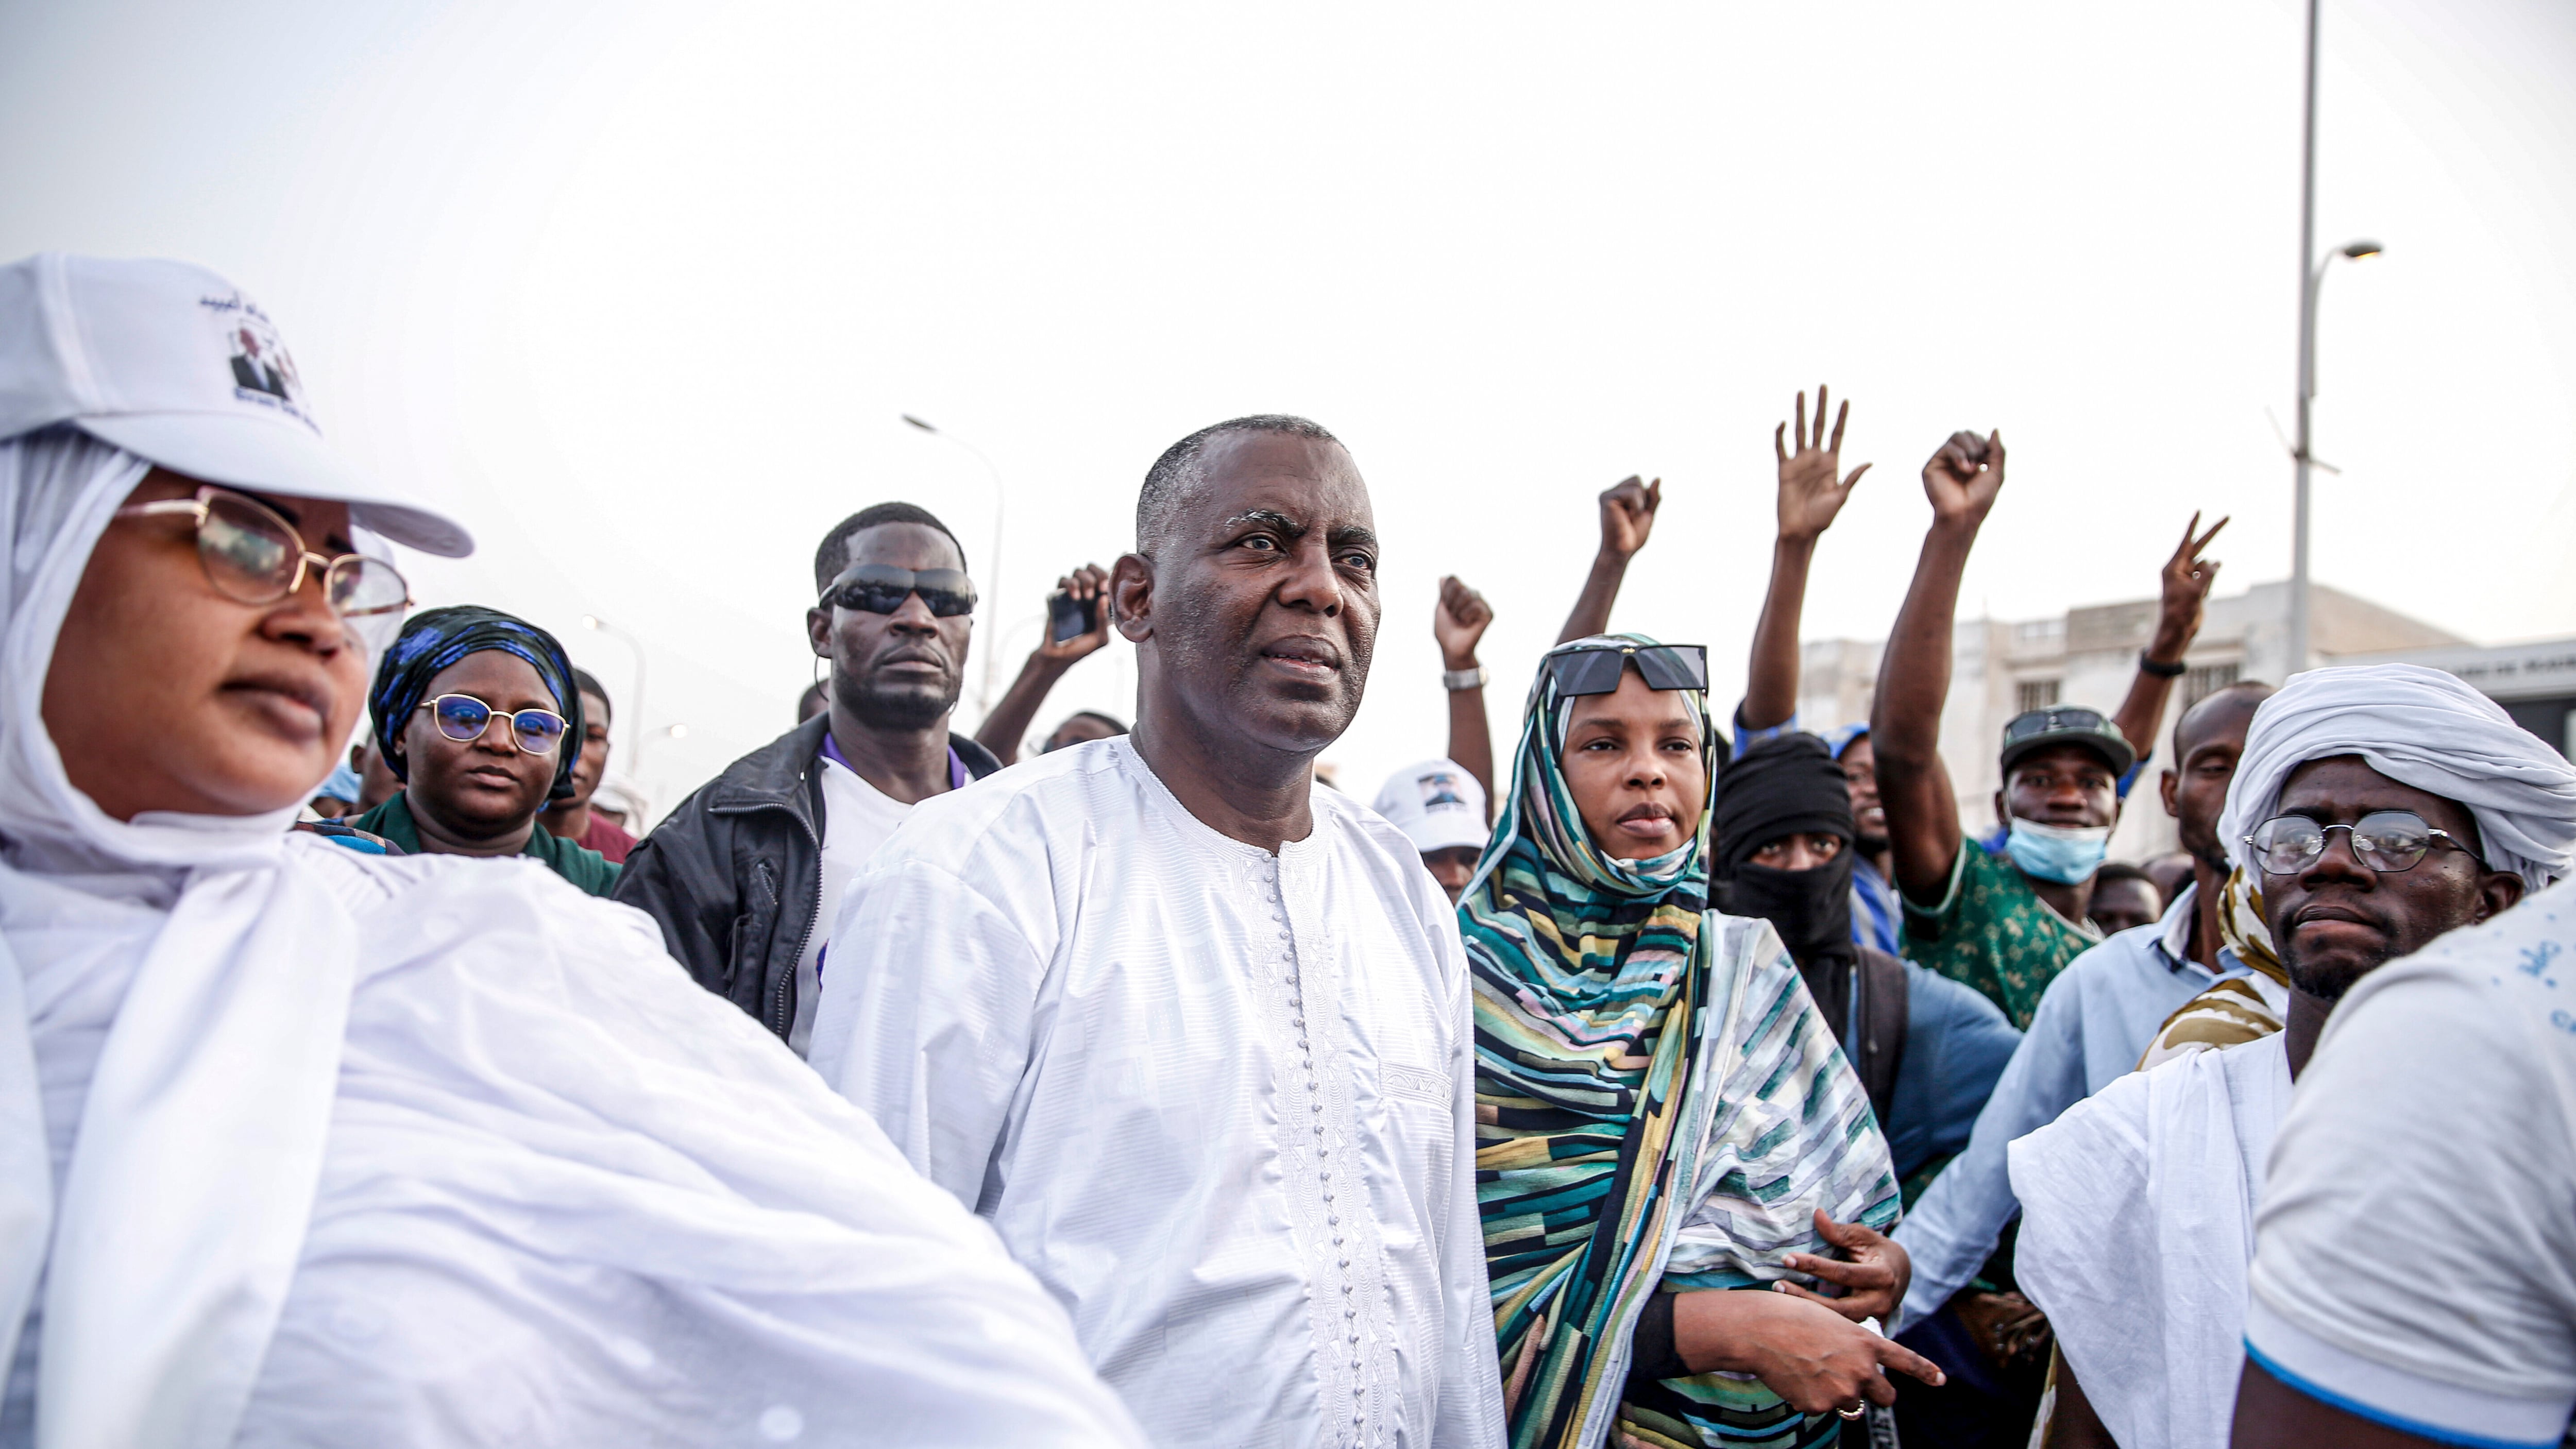 Biram Ould Dah Ould Abeid, centre, taking part in a rally among his supporters before the presidential election in Mauritania (Mamsy Elkeihel/AP)